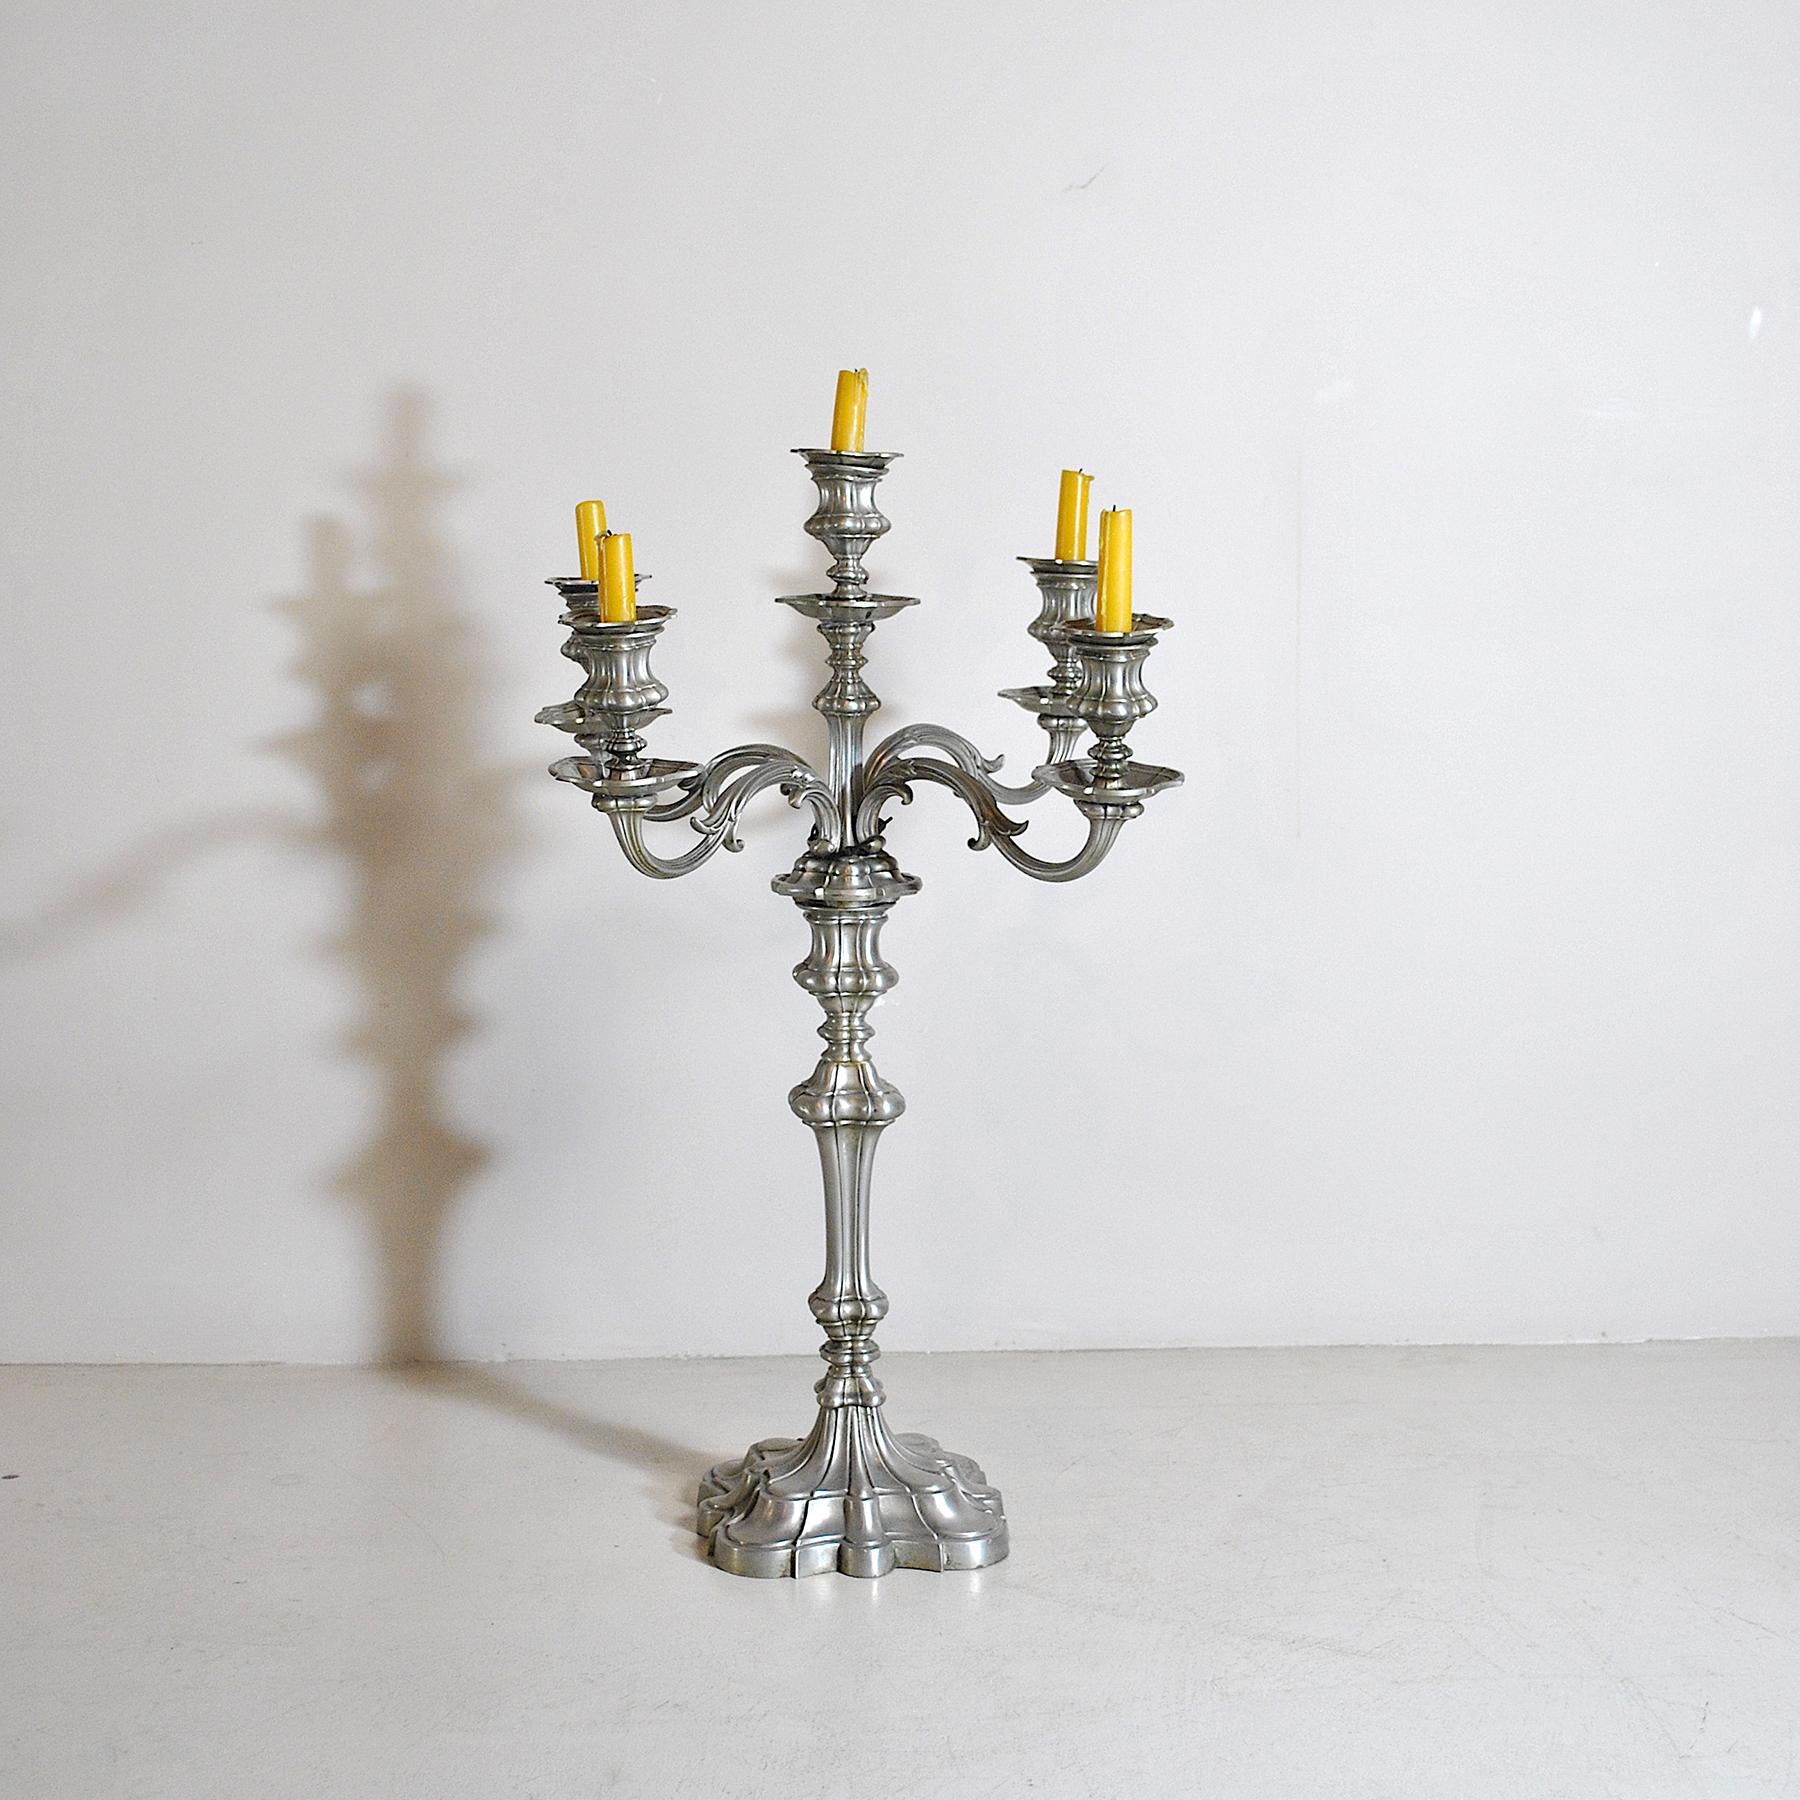 Antique pewter candleholders.